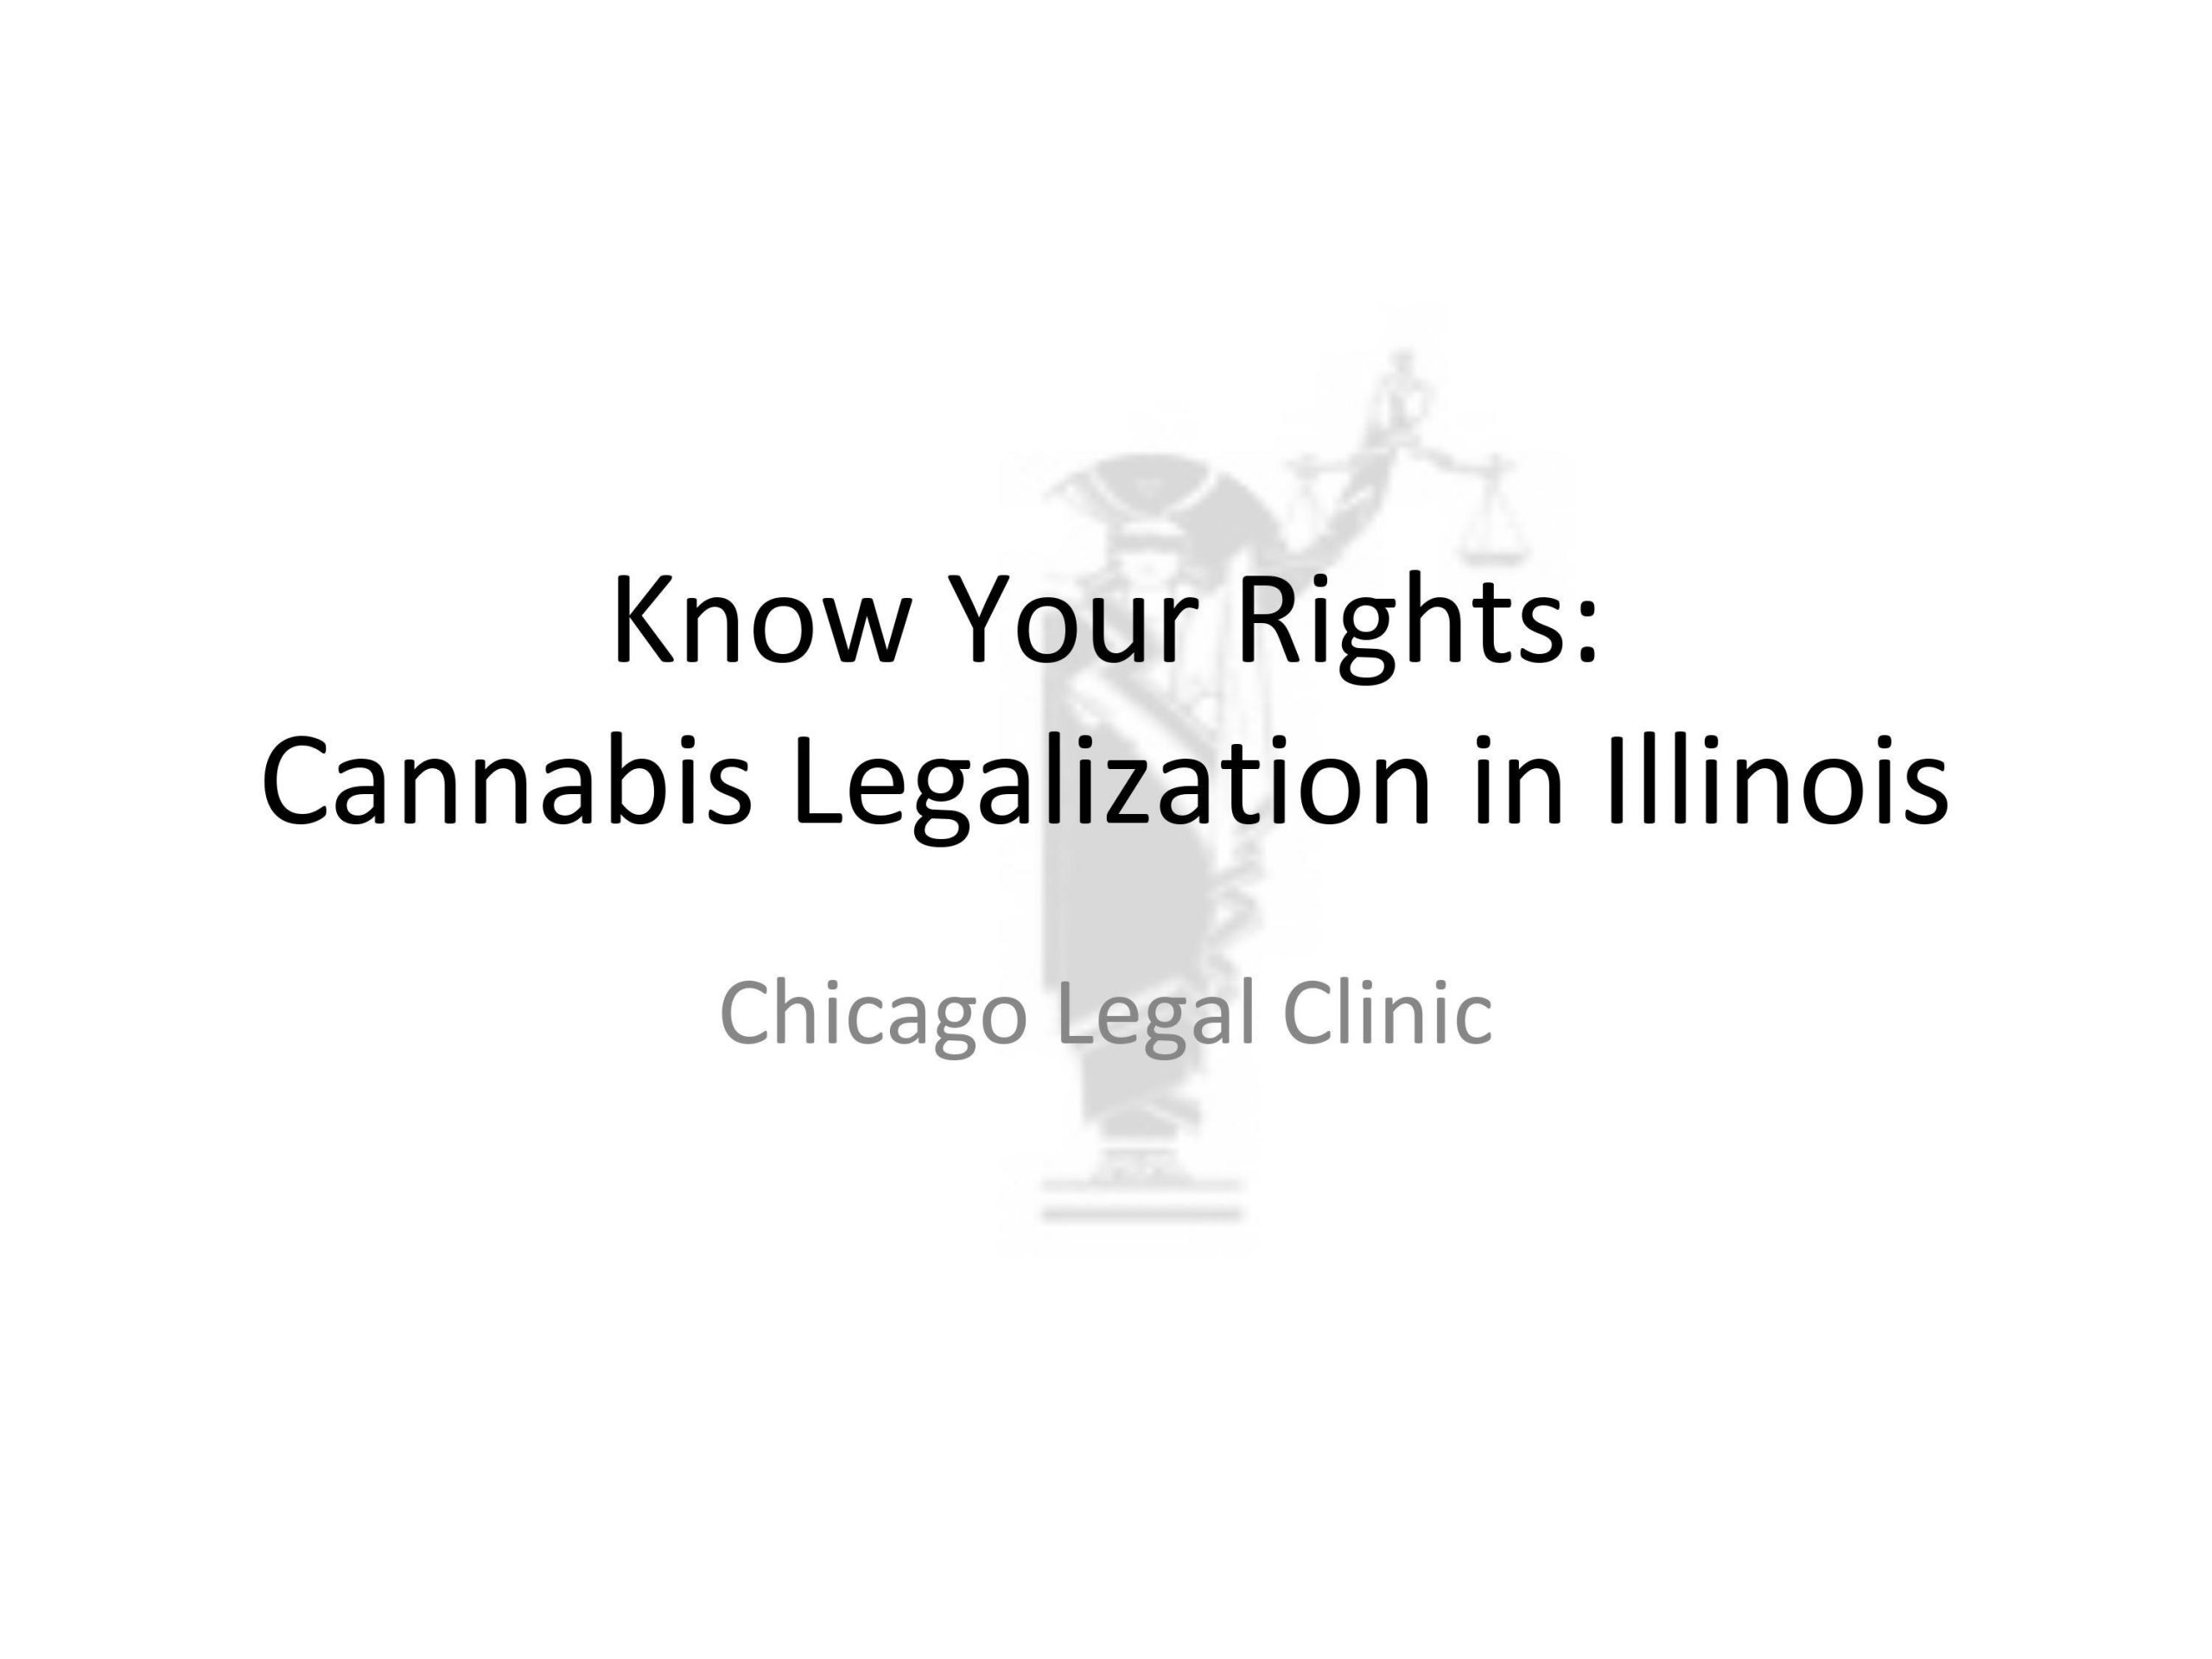 Know Your Rights: Cannabis Legalization in Illinois